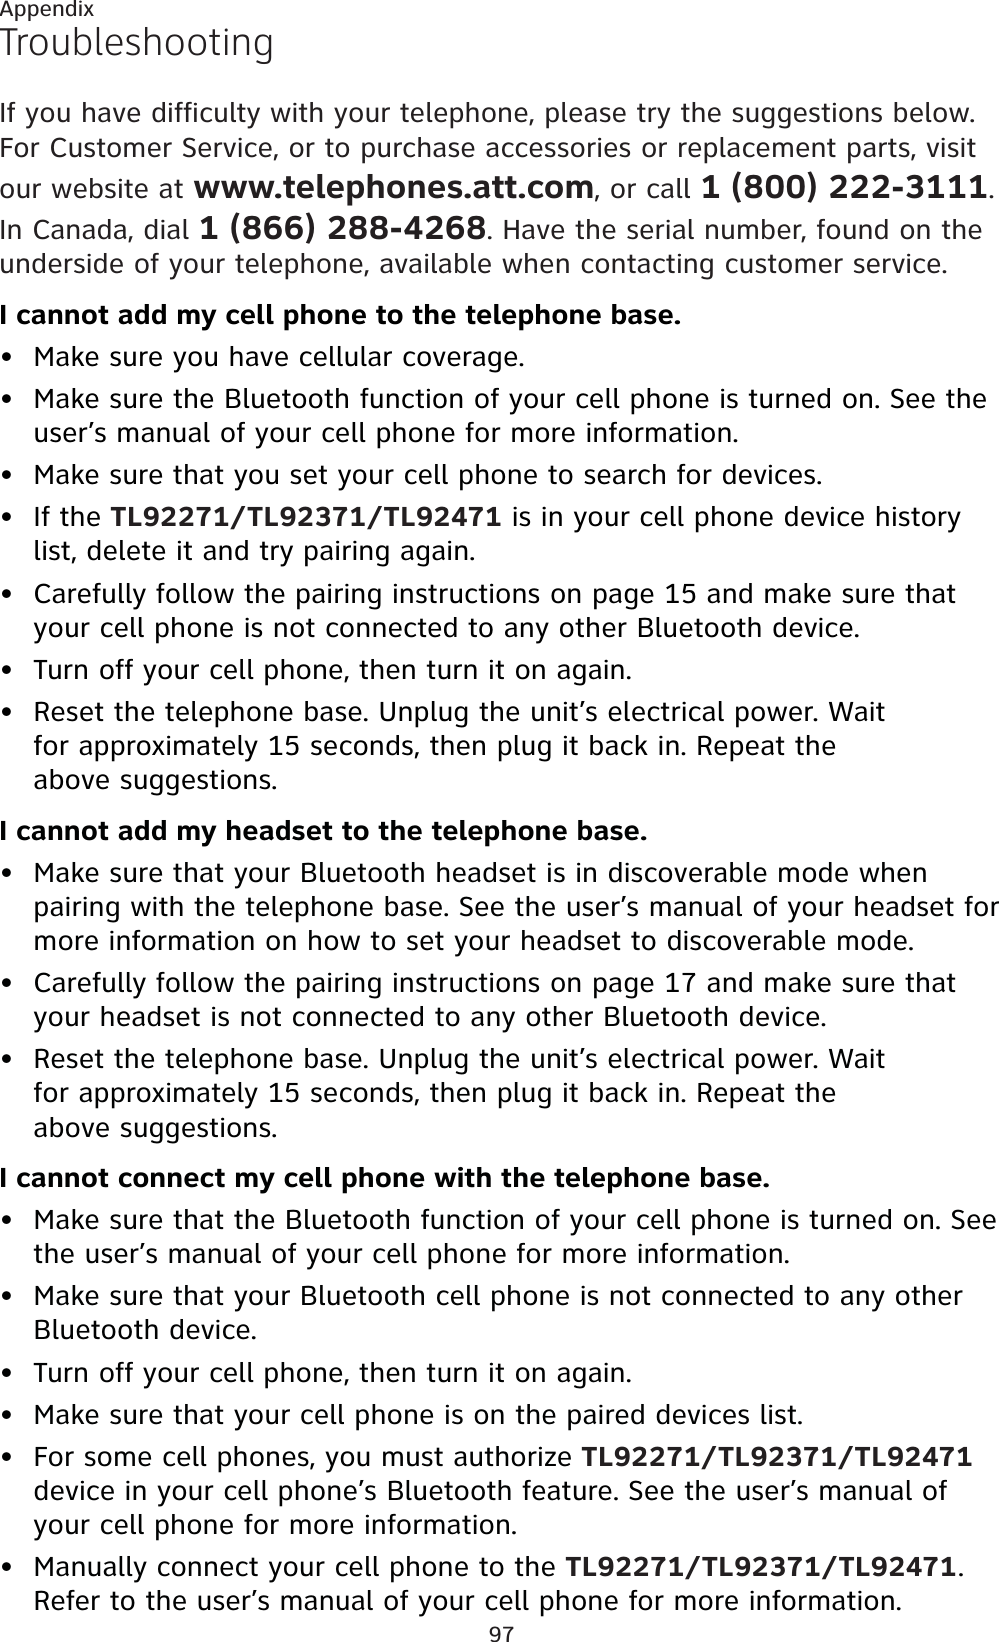 97AppendixTroubleshootingIf you have difficulty with your telephone, please try the suggestions below. For Customer Service, or to purchase accessories or replacement parts, visit our website at www.telephones.att.com, or call 1 (800) 222-3111.In Canada, dial 1 (866) 288-4268. Have the serial number, found on the underside of your telephone, available when contacting customer service.I cannot add my cell phone to the telephone base.Make sure you have cellular coverage.Make sure the Bluetooth function of your cell phone is turned on. See the user’s manual of your cell phone for more information.Make sure that you set your cell phone to search for devices.If the TL92271/TL92371/TL92471 is in your cell phone device history list, delete it and try pairing again.Carefully follow the pairing instructions on page 15 and make sure that your cell phone is not connected to any other Bluetooth device.Turn off your cell phone, then turn it on again.Reset the telephone base. Unplug the unit’s electrical power. Wait for approximately 15 seconds, then plug it back in. Repeat the above suggestions.I cannot add my headset to the telephone base.Make sure that your Bluetooth headset is in discoverable mode when pairing with the telephone base. See the user’s manual of your headset for more information on how to set your headset to discoverable mode.Carefully follow the pairing instructions on page 17 and make sure that your headset is not connected to any other Bluetooth device.Reset the telephone base. Unplug the unit’s electrical power. Wait for approximately 15 seconds, then plug it back in. Repeat the above suggestions.I cannot connect my cell phone with the telephone base.Make sure that the Bluetooth function of your cell phone is turned on. See the user’s manual of your cell phone for more information.Make sure that your Bluetooth cell phone is not connected to any other Bluetooth device.Turn off your cell phone, then turn it on again.Make sure that your cell phone is on the paired devices list.For some cell phones, you must authorize TL92271/TL92371/TL92471device in your cell phone’s Bluetooth feature. See the user’s manual of your cell phone for more information.Manually connect your cell phone to the TL92271/TL92371/TL92471.Refer to the user’s manual of your cell phone for more information.••••••••••••••••